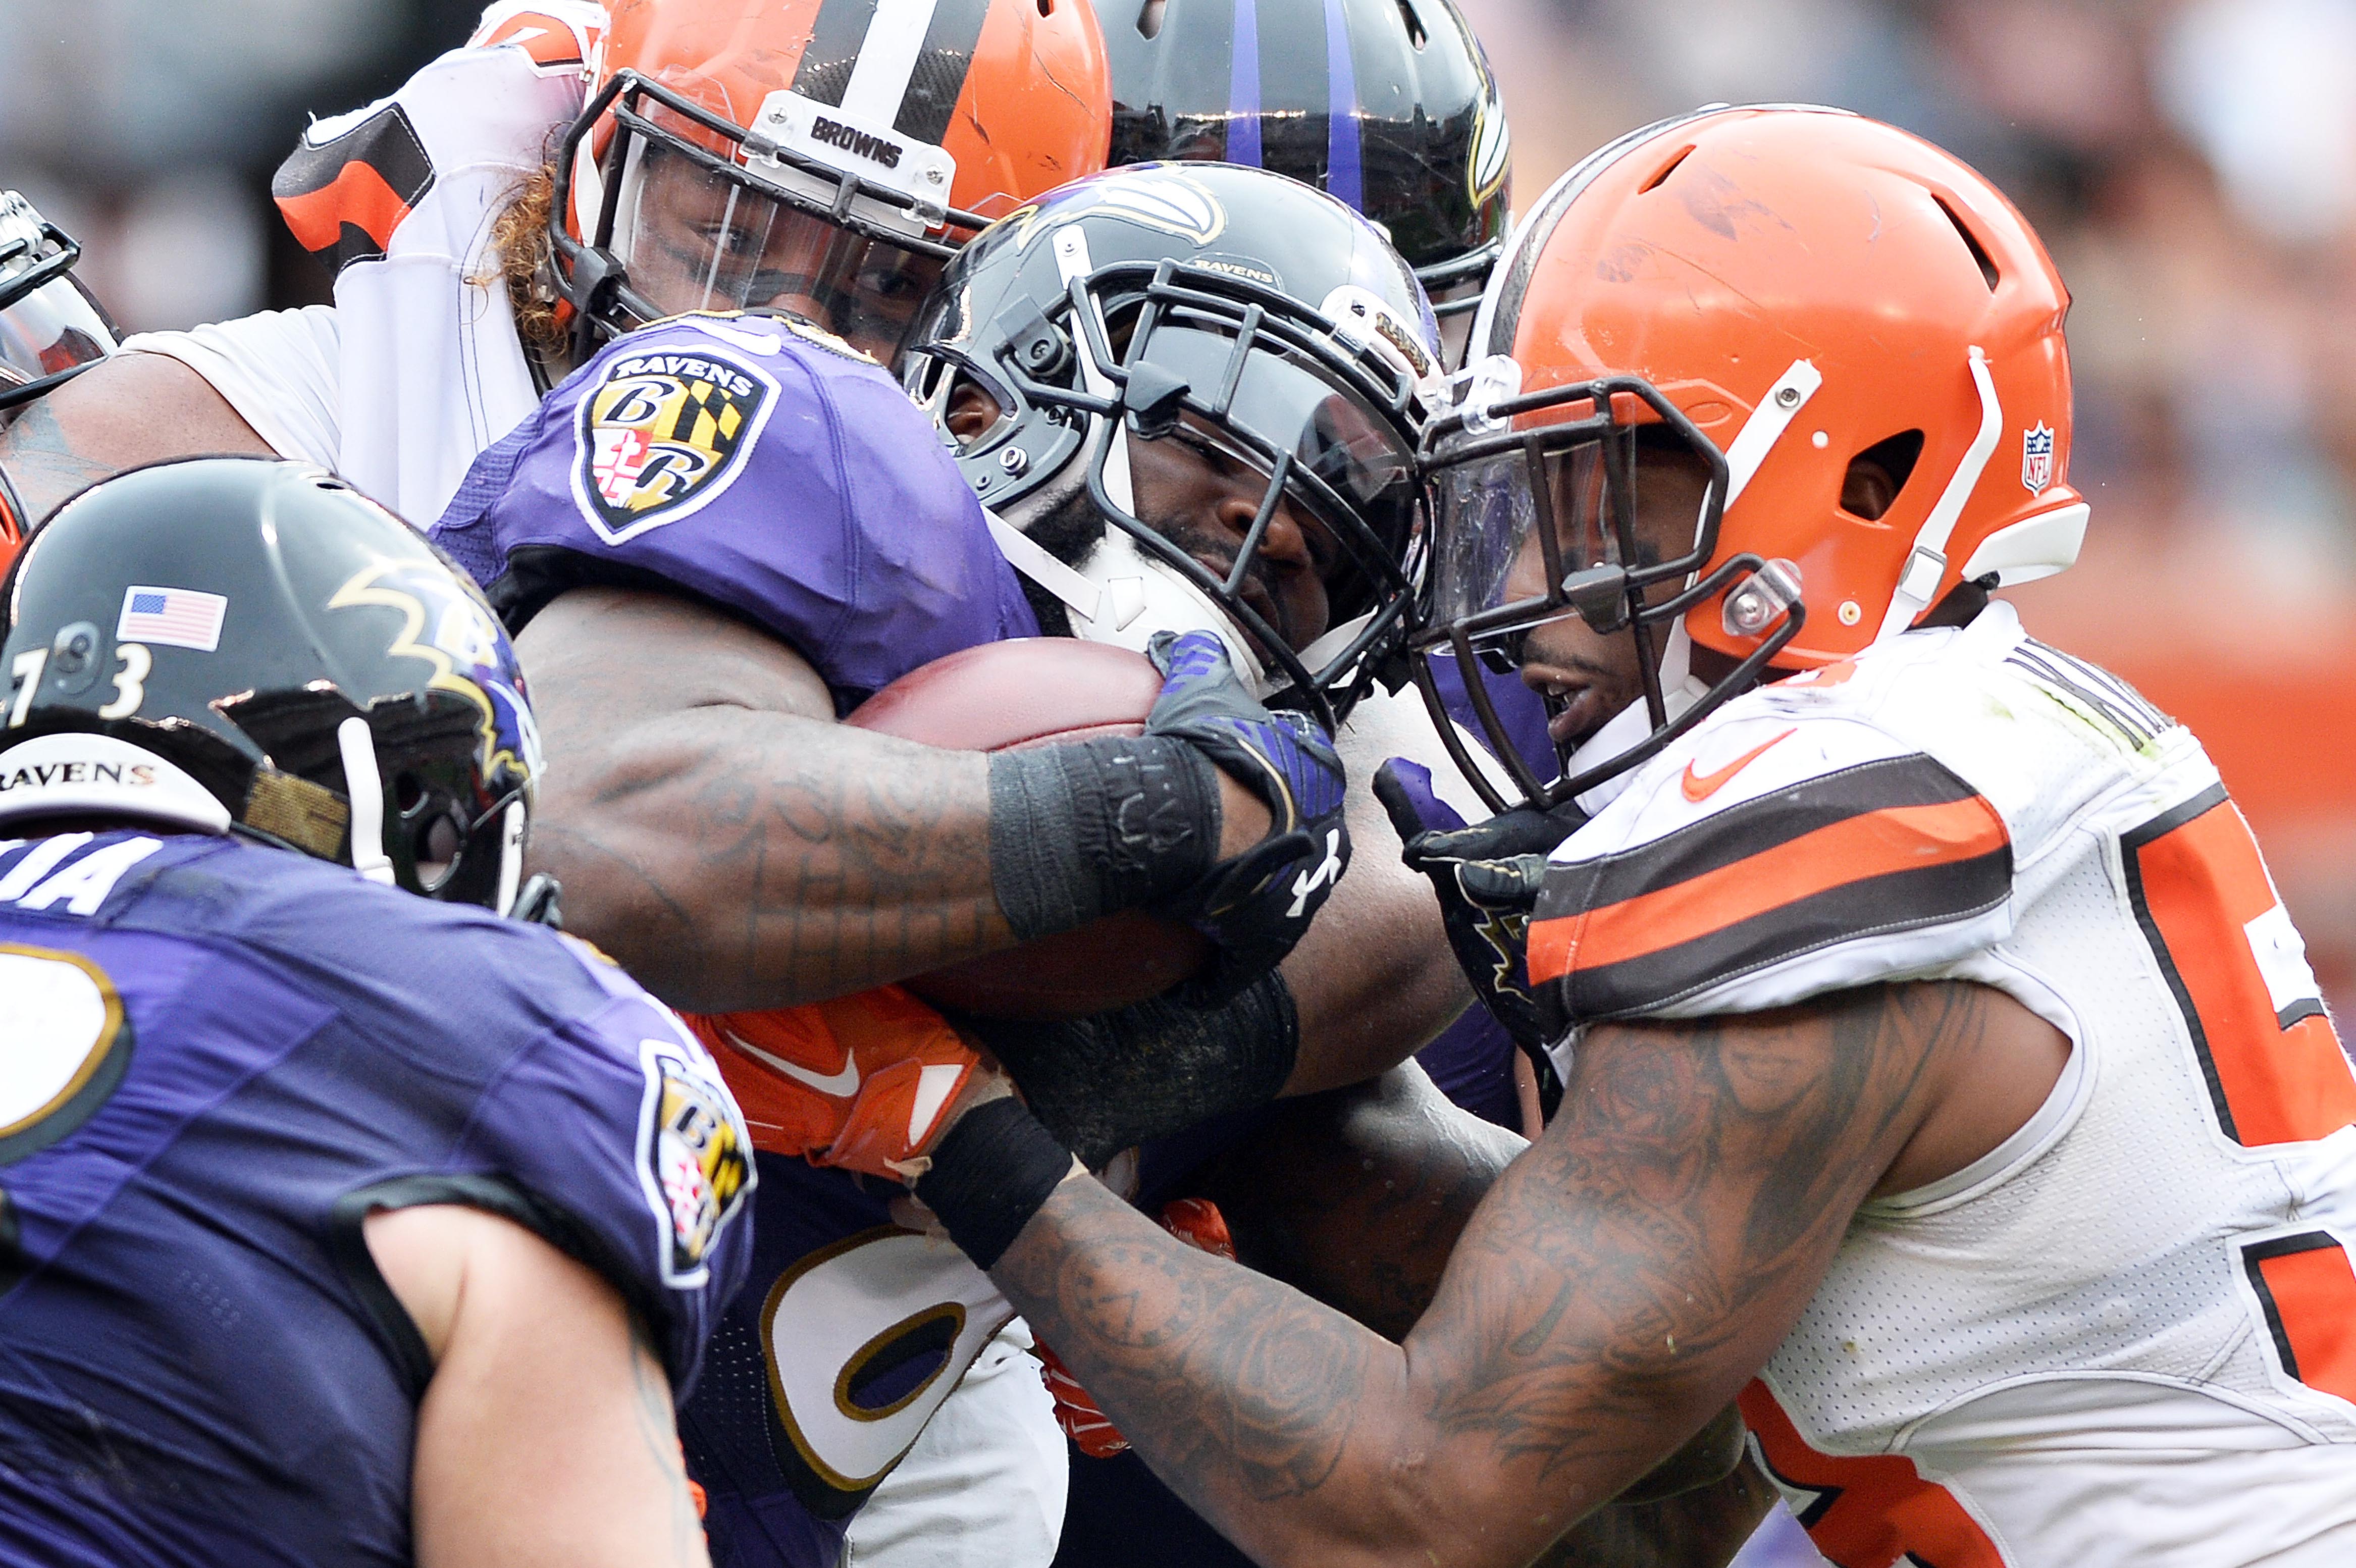 Cleveland Browns vs. Baltimore Ravens: Watch NFL football live for